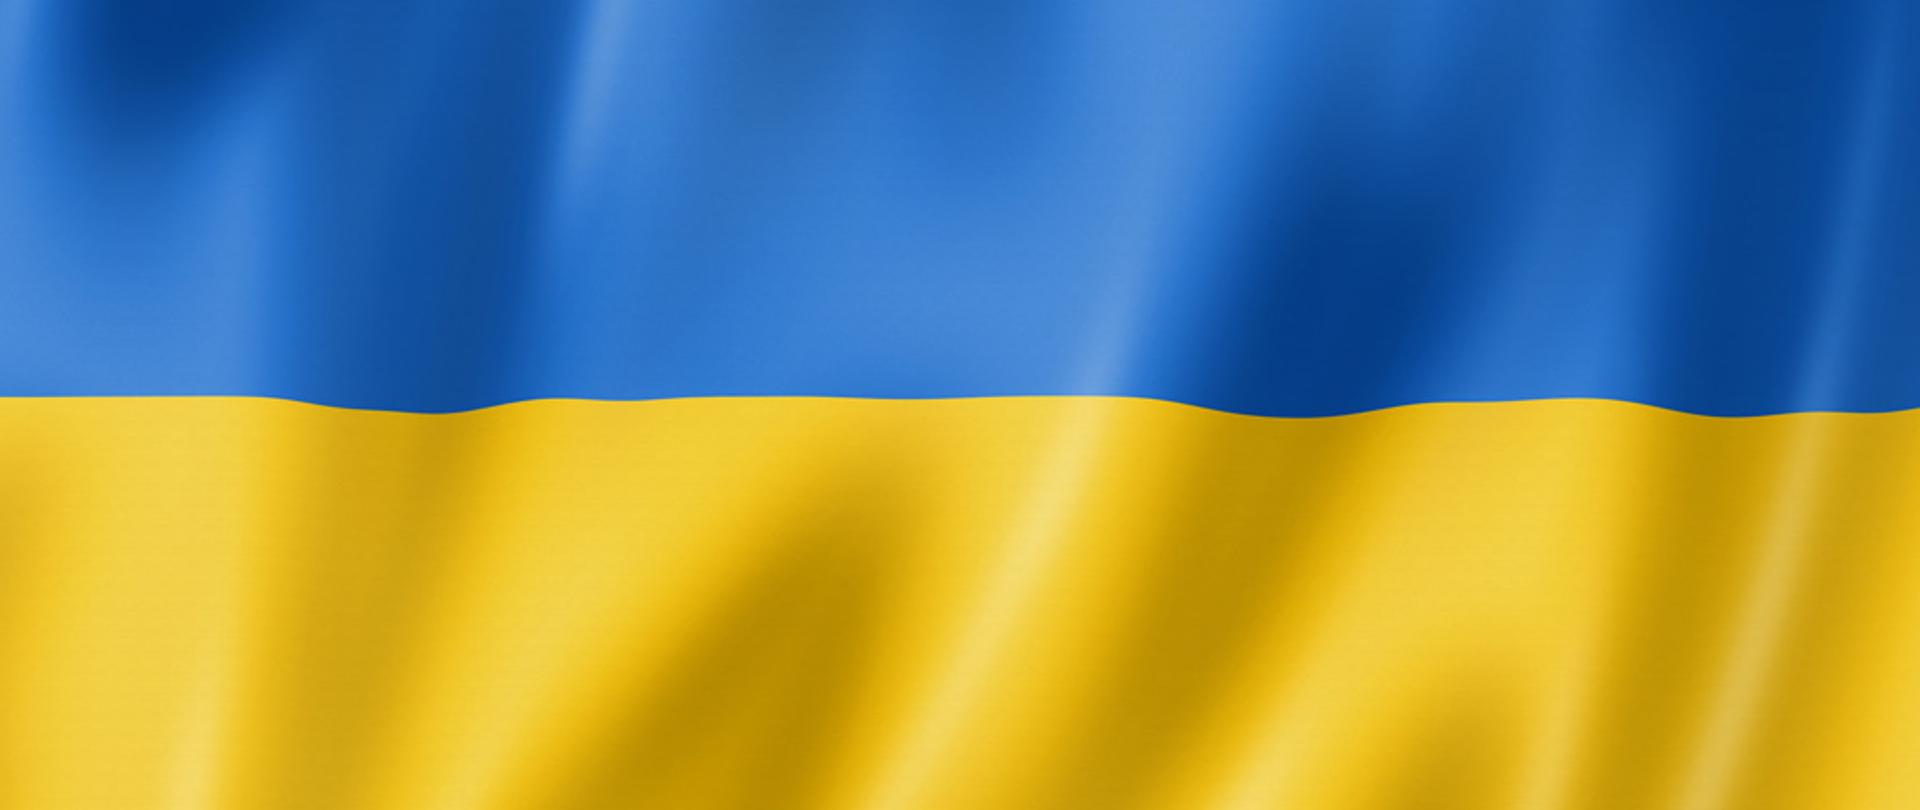 Blue and yellow flag